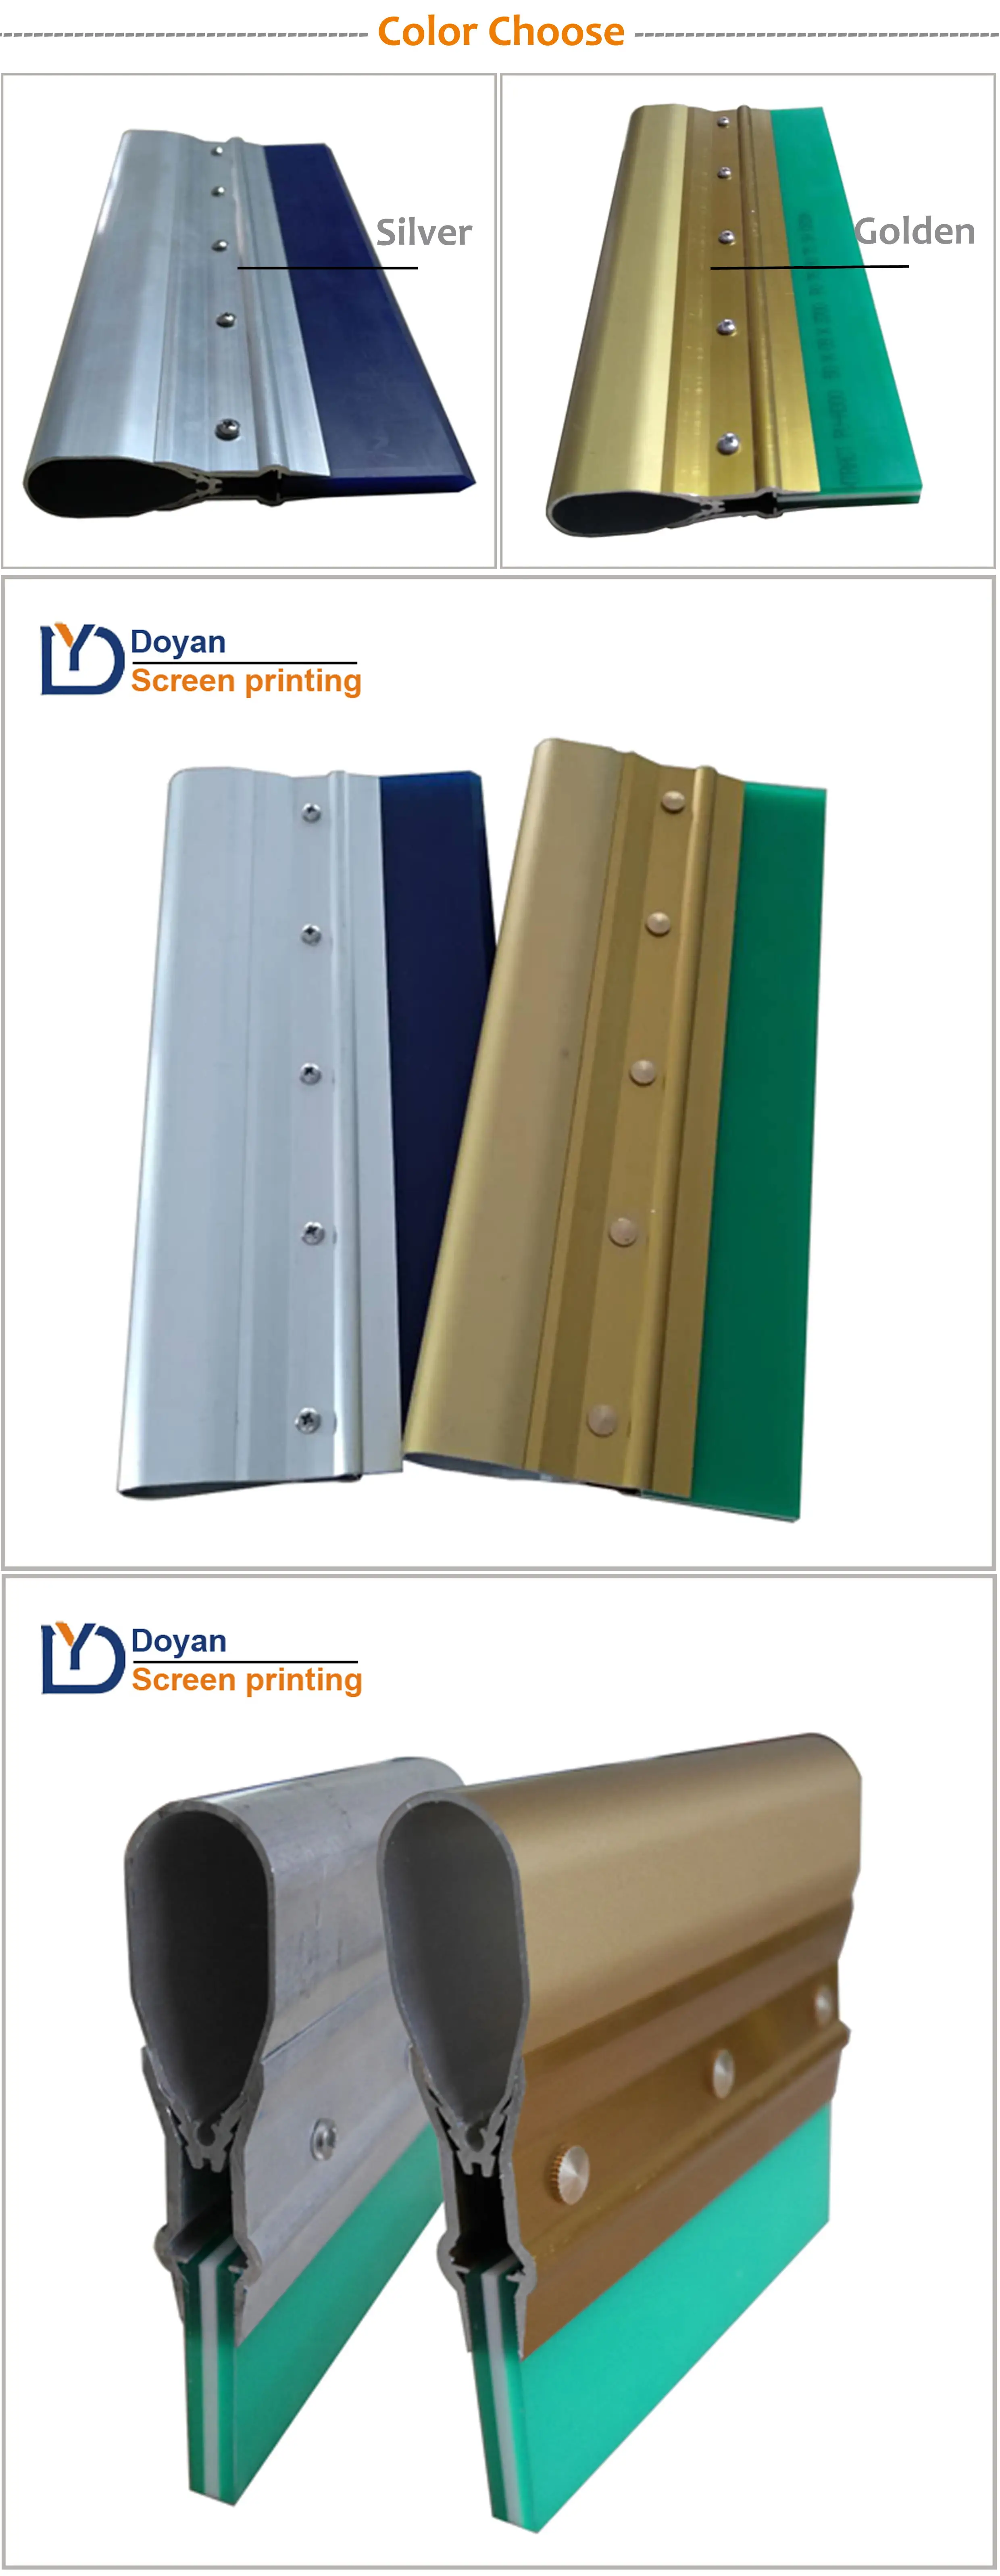 Composite aluminum handle squeegee for screen printing 